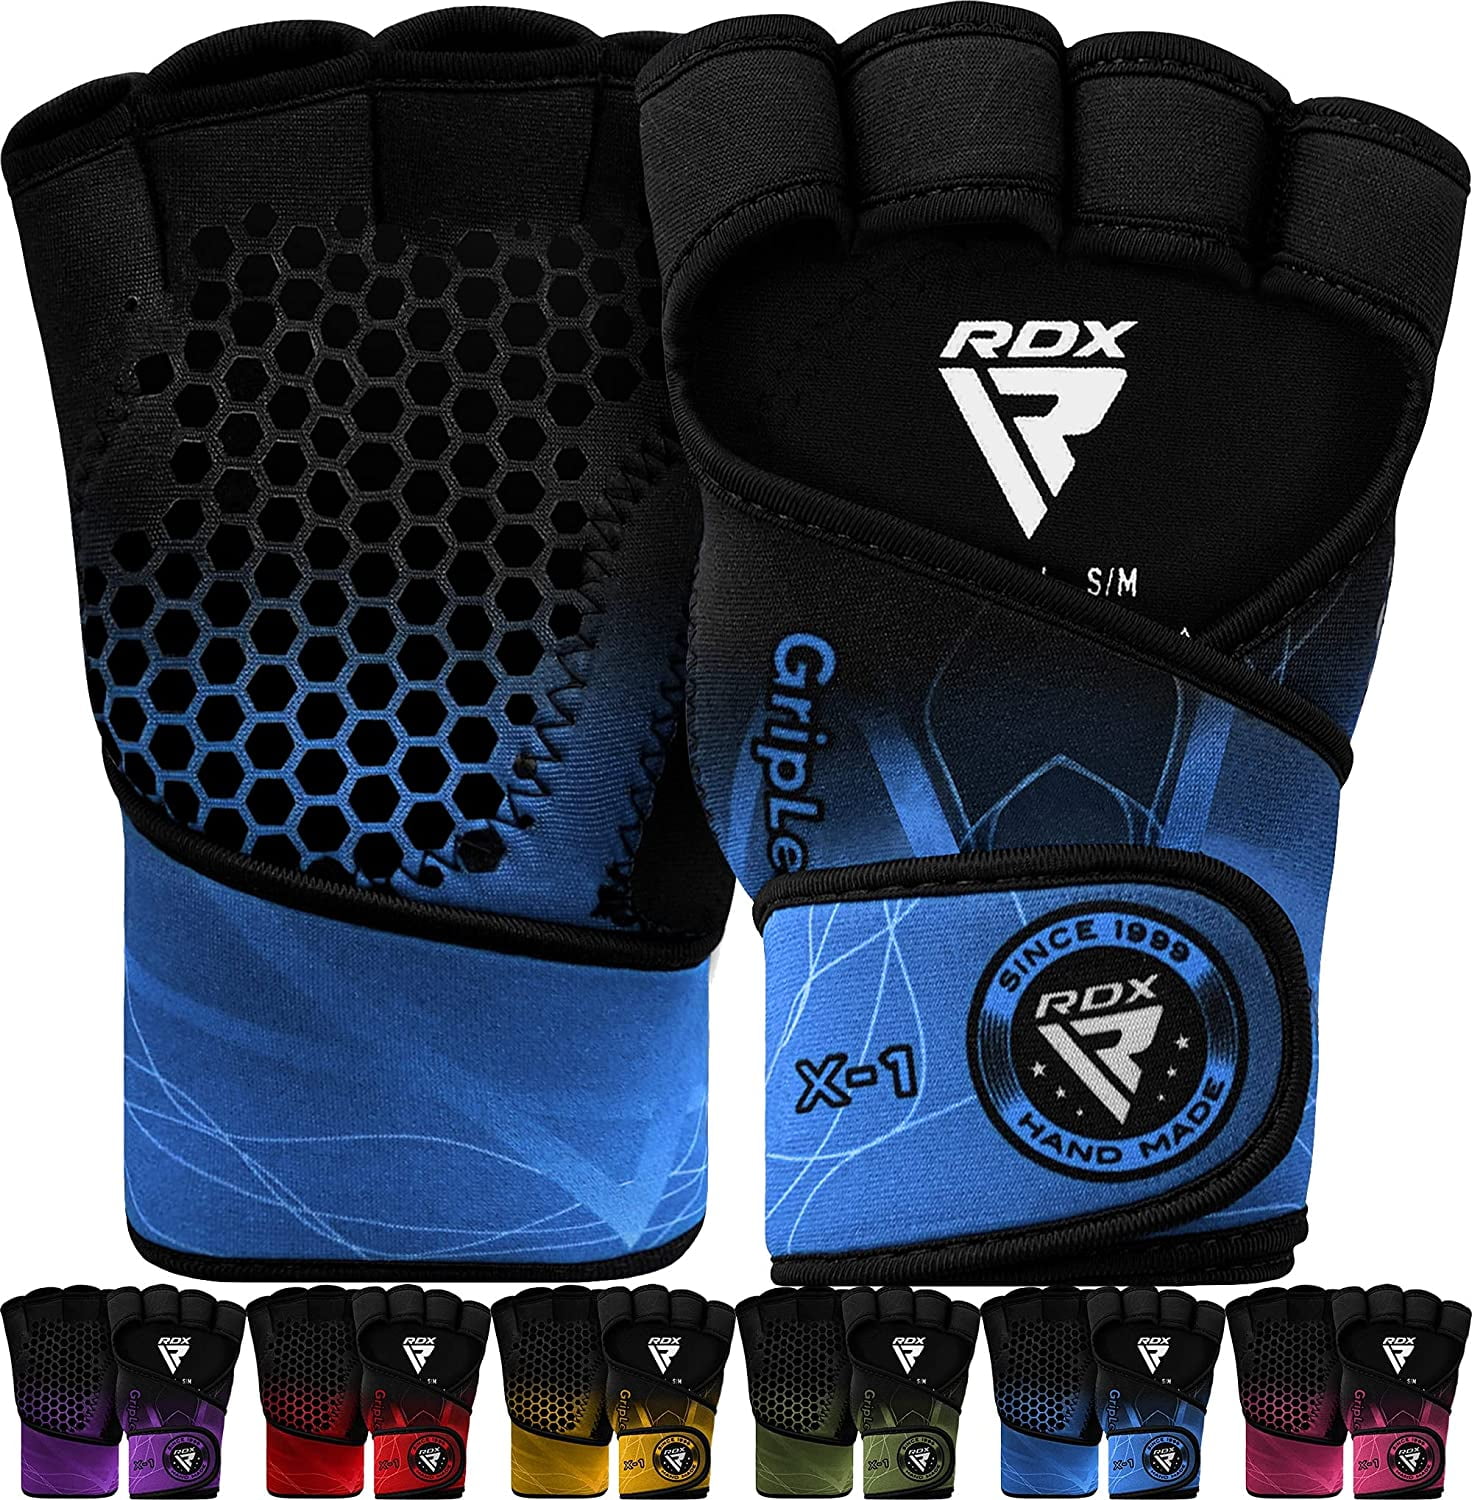 RDX Power Lifting Gloves Training Weight Lifting Gym Fitness Bodybuilding Strap 